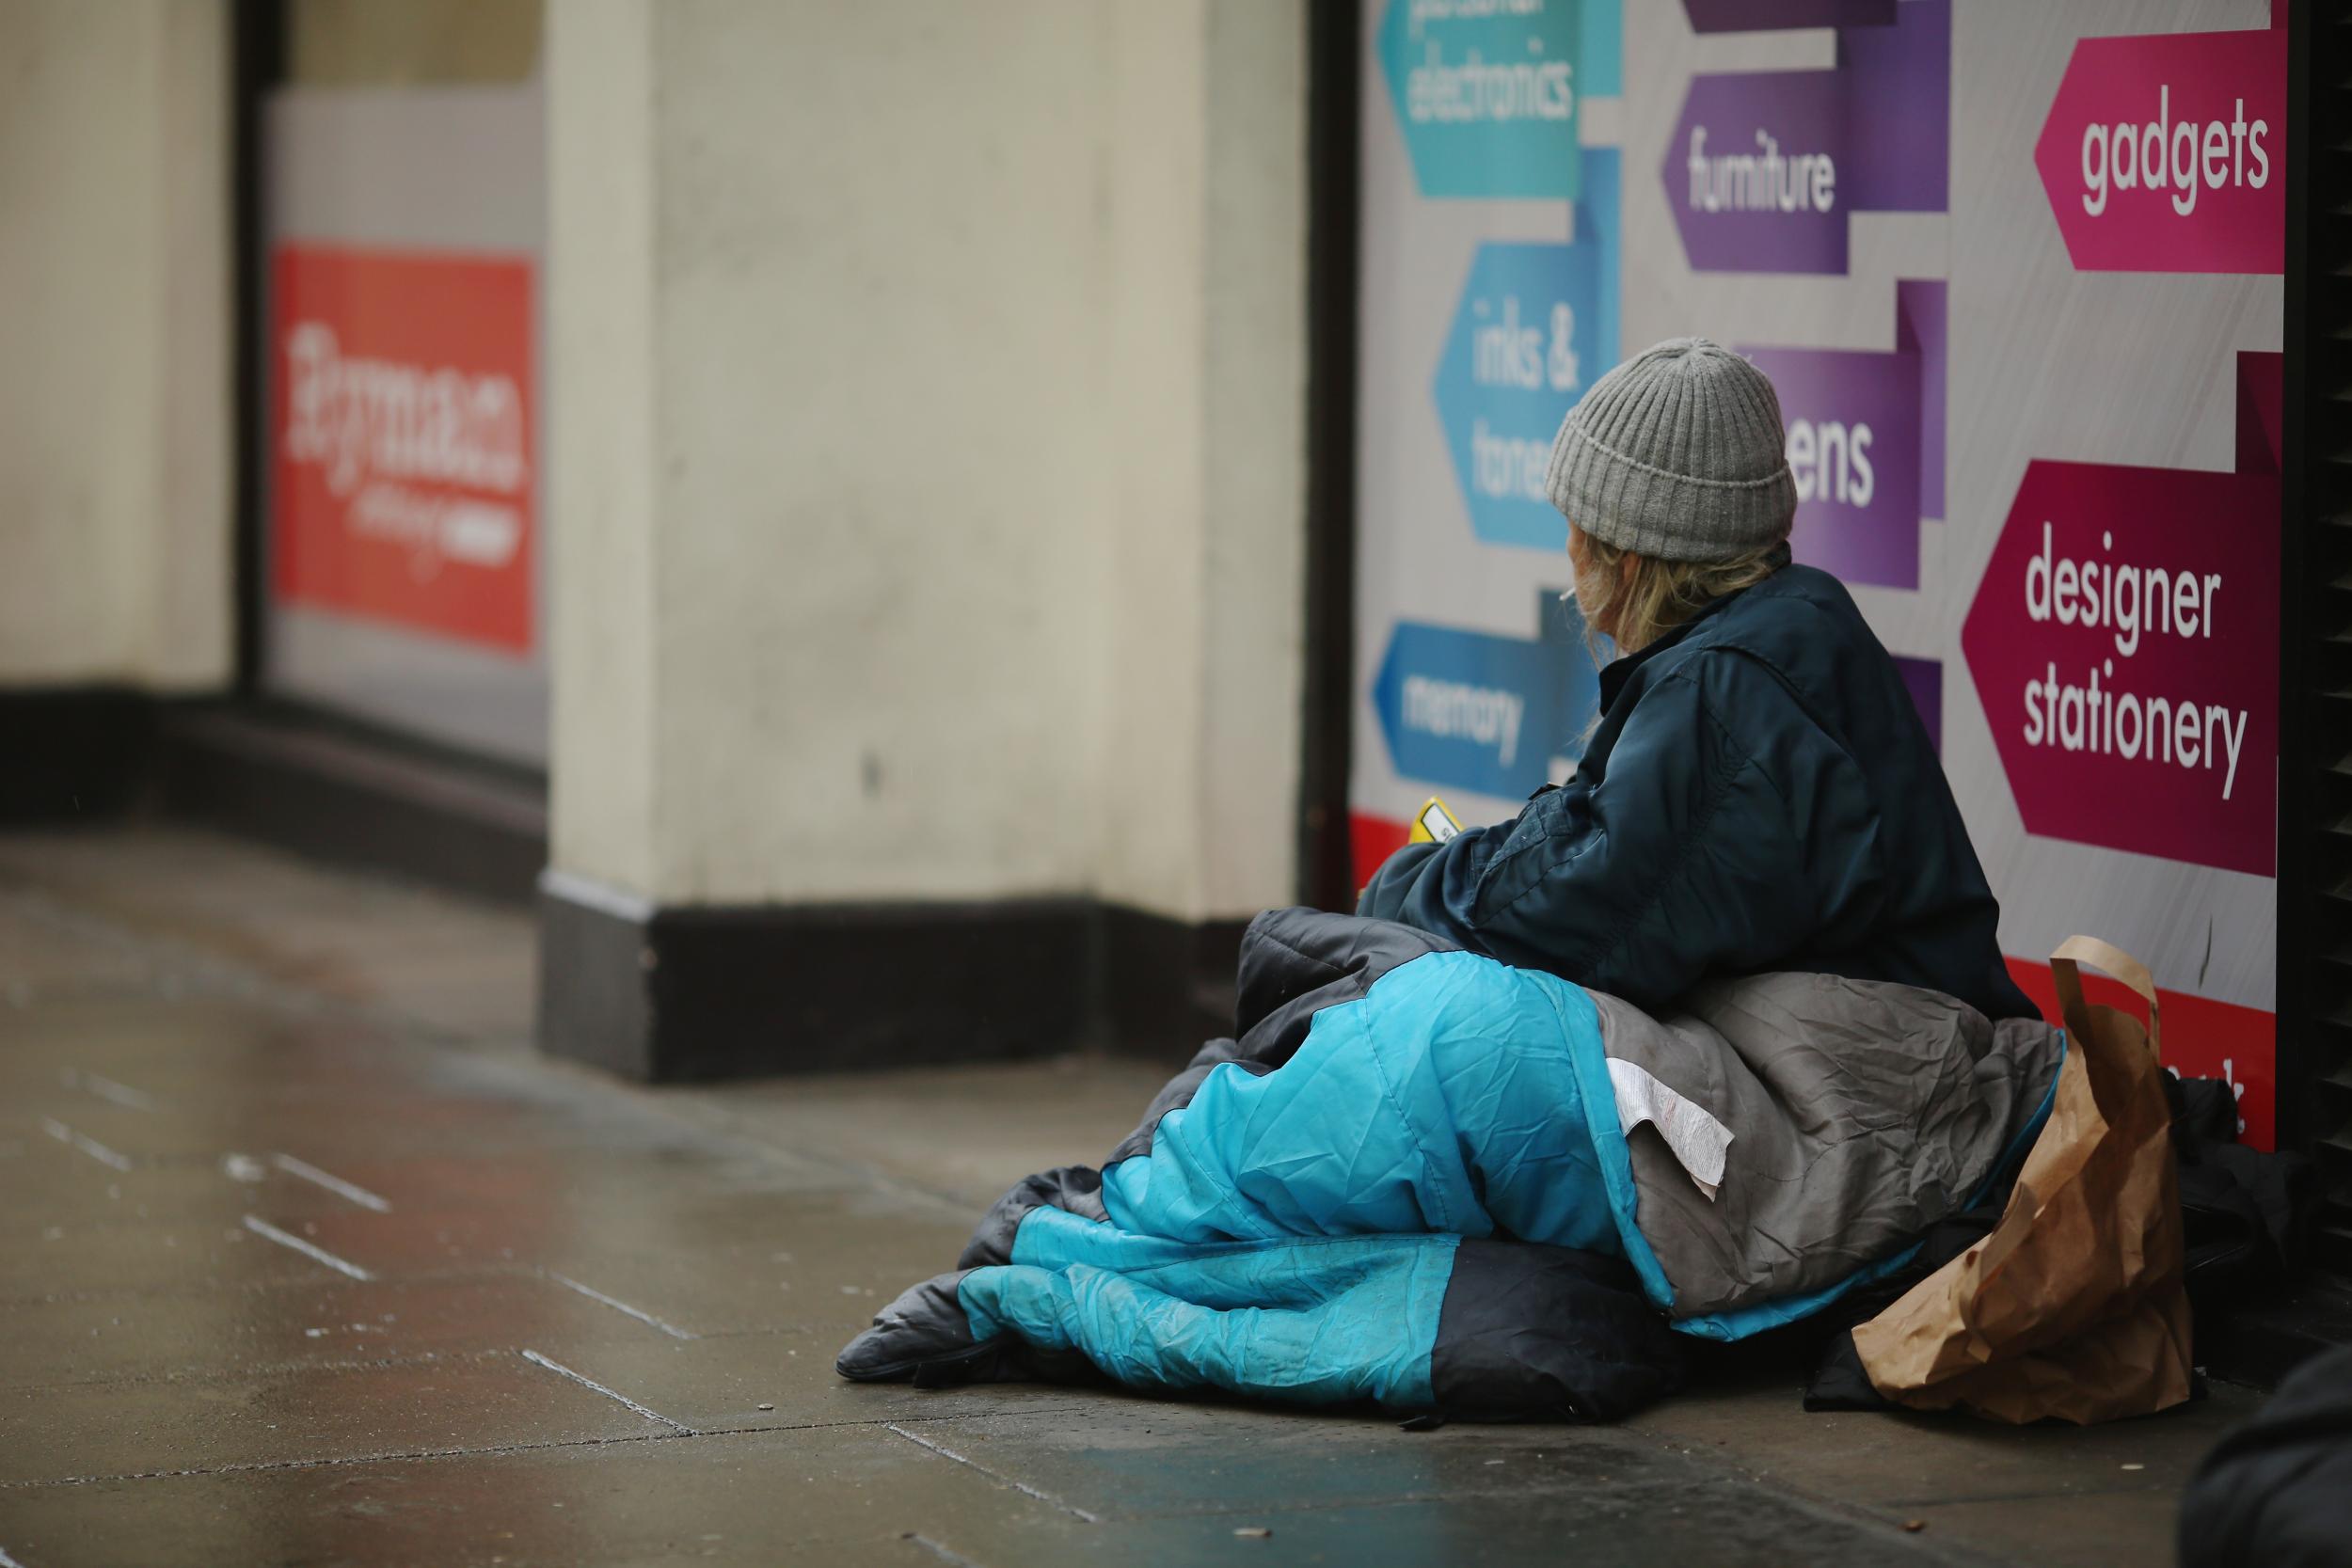 Just under 43,000 families made homeless across all sectors in the last year